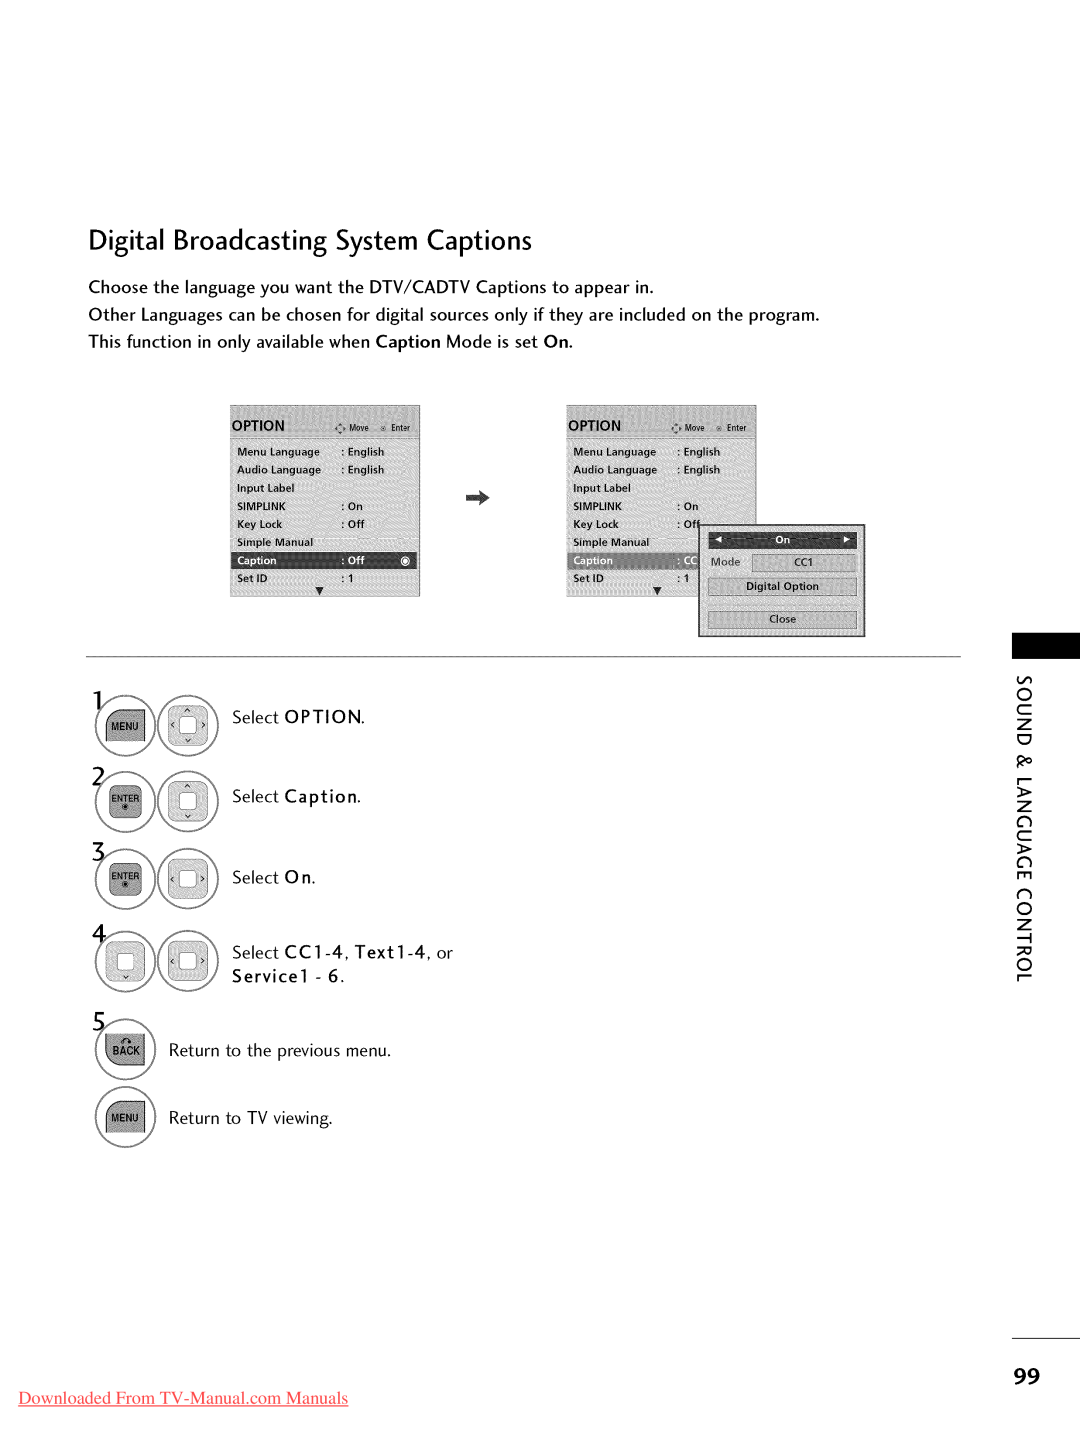 LG Electronics 47LD450, 32LD350 Digital Broadcasting System Captions, Select OPTION, Select CC1-4, Text1-4, or Service1 